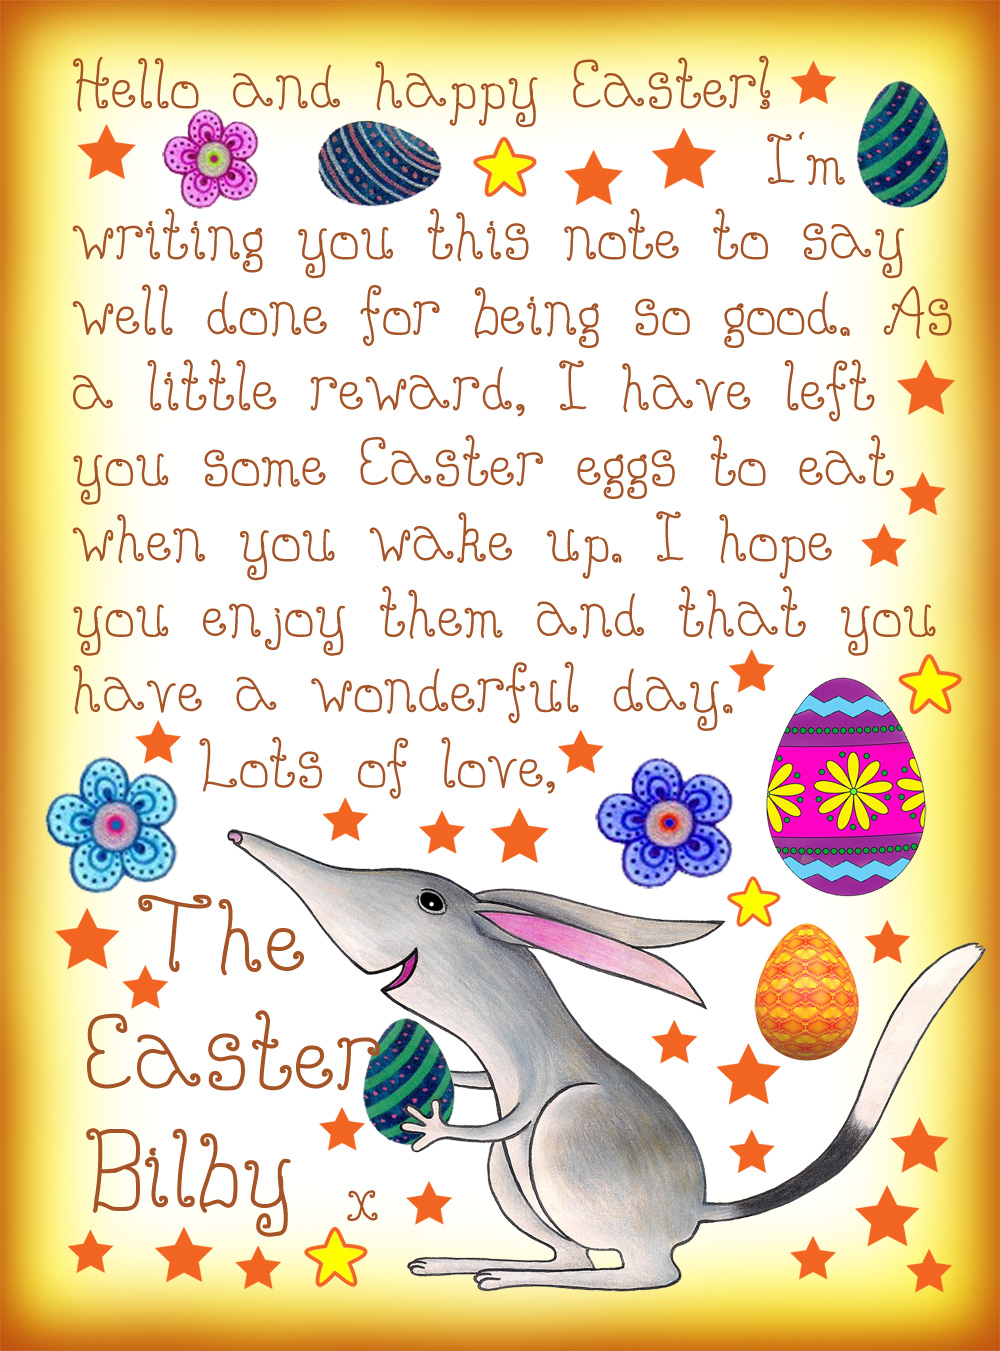 Easter Bilby note saying he has left you some Easter eggs